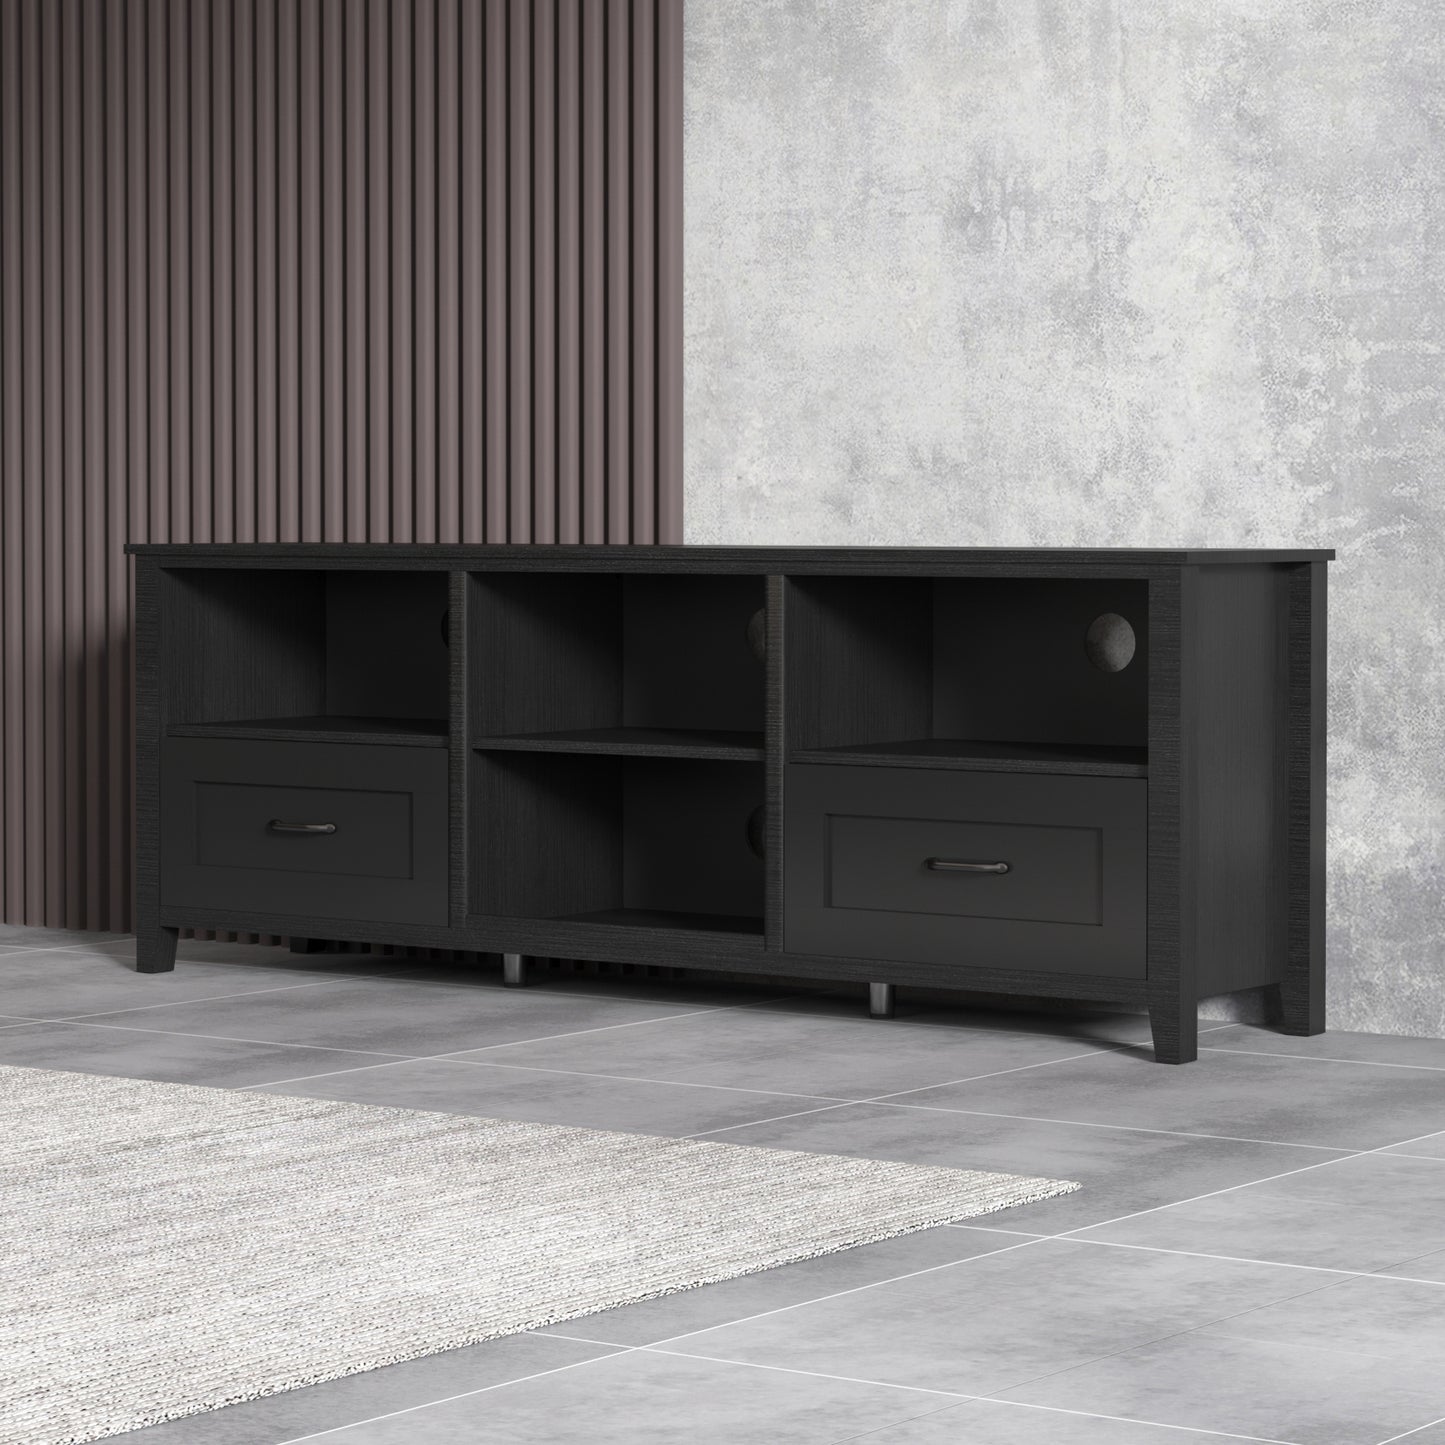 70.08 Inch Length Black TV Stand for Living Room and Bedroom, with 2 Drawers and 4 High-Capacity Storage Compartment.